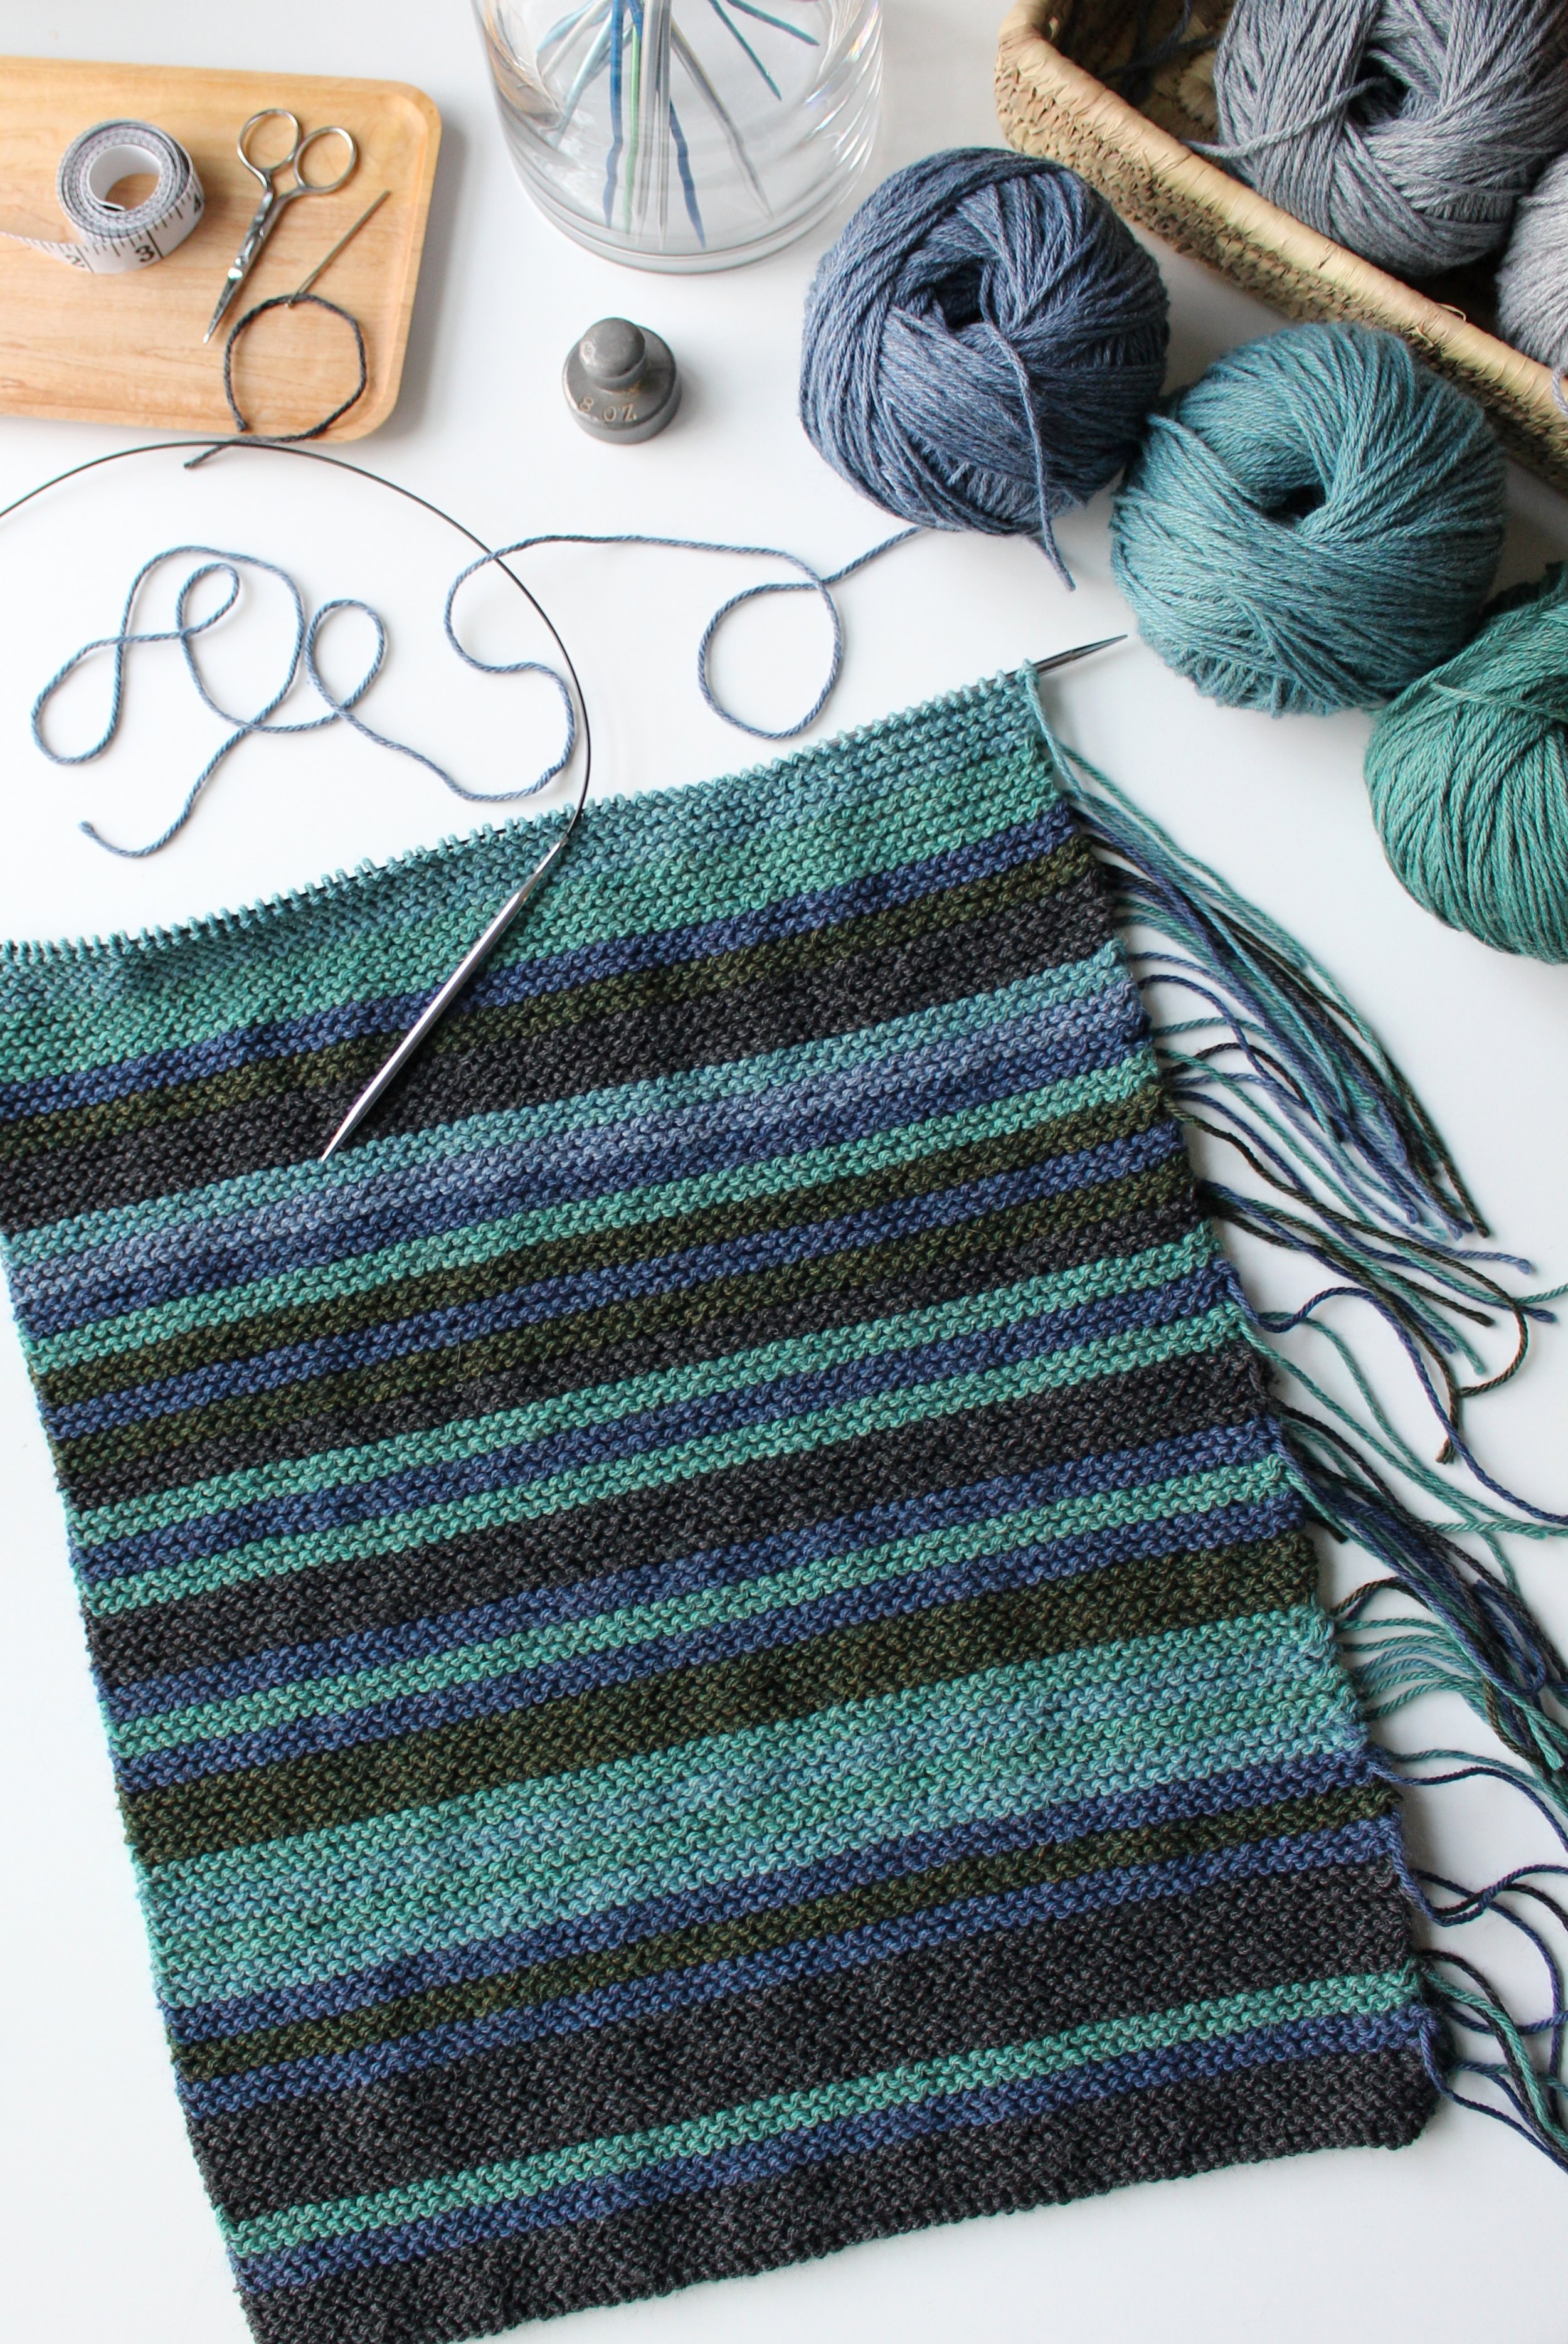 Free Pattern: How to Knit a Garter Stitch Temperature